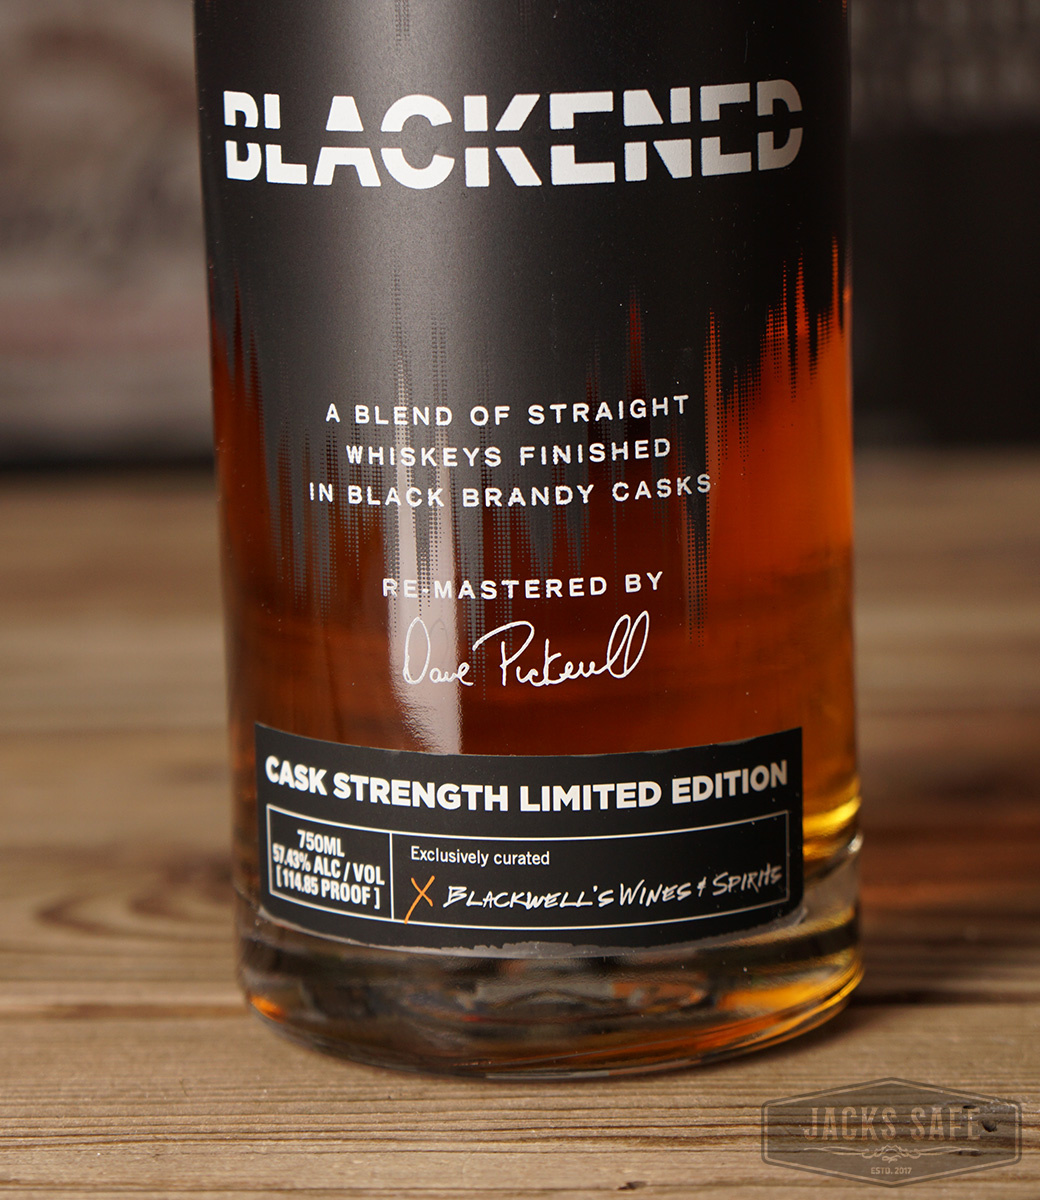 OTHERS - Blackened - Metallica -  Cask Strength Limited Edition  - SEVERAL EDITIONS - SEE DROPDOWN